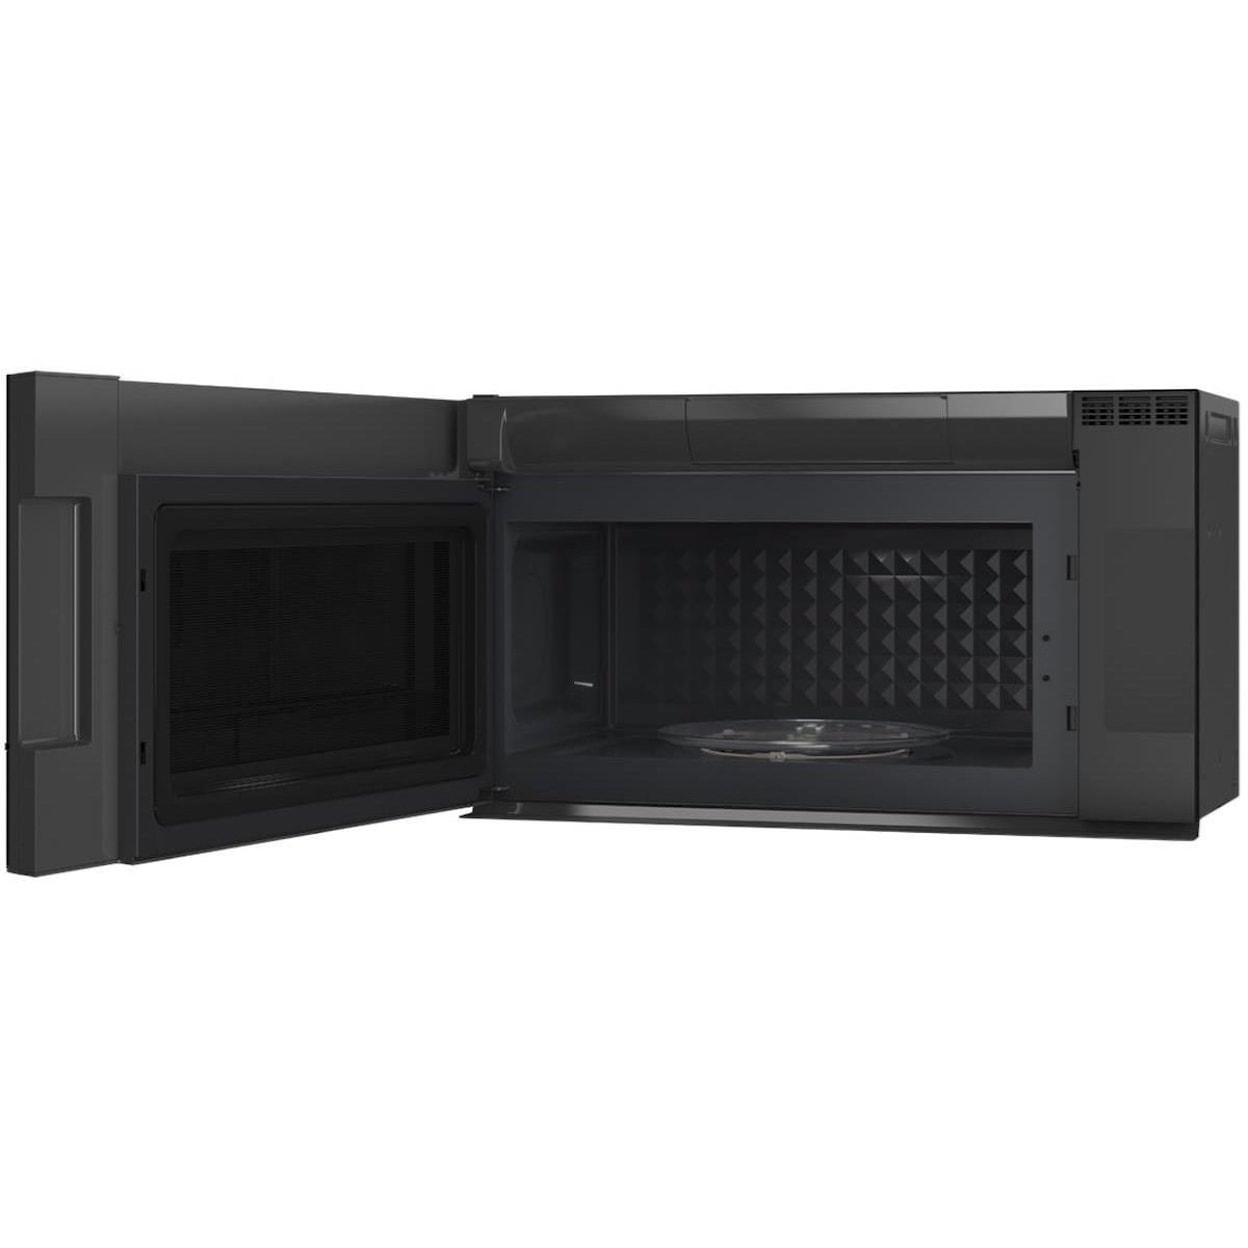 GE Appliances GE Cafe´ Microwave Oven Cafe´™ 2.1 Cu. Ft. Microwave Oven